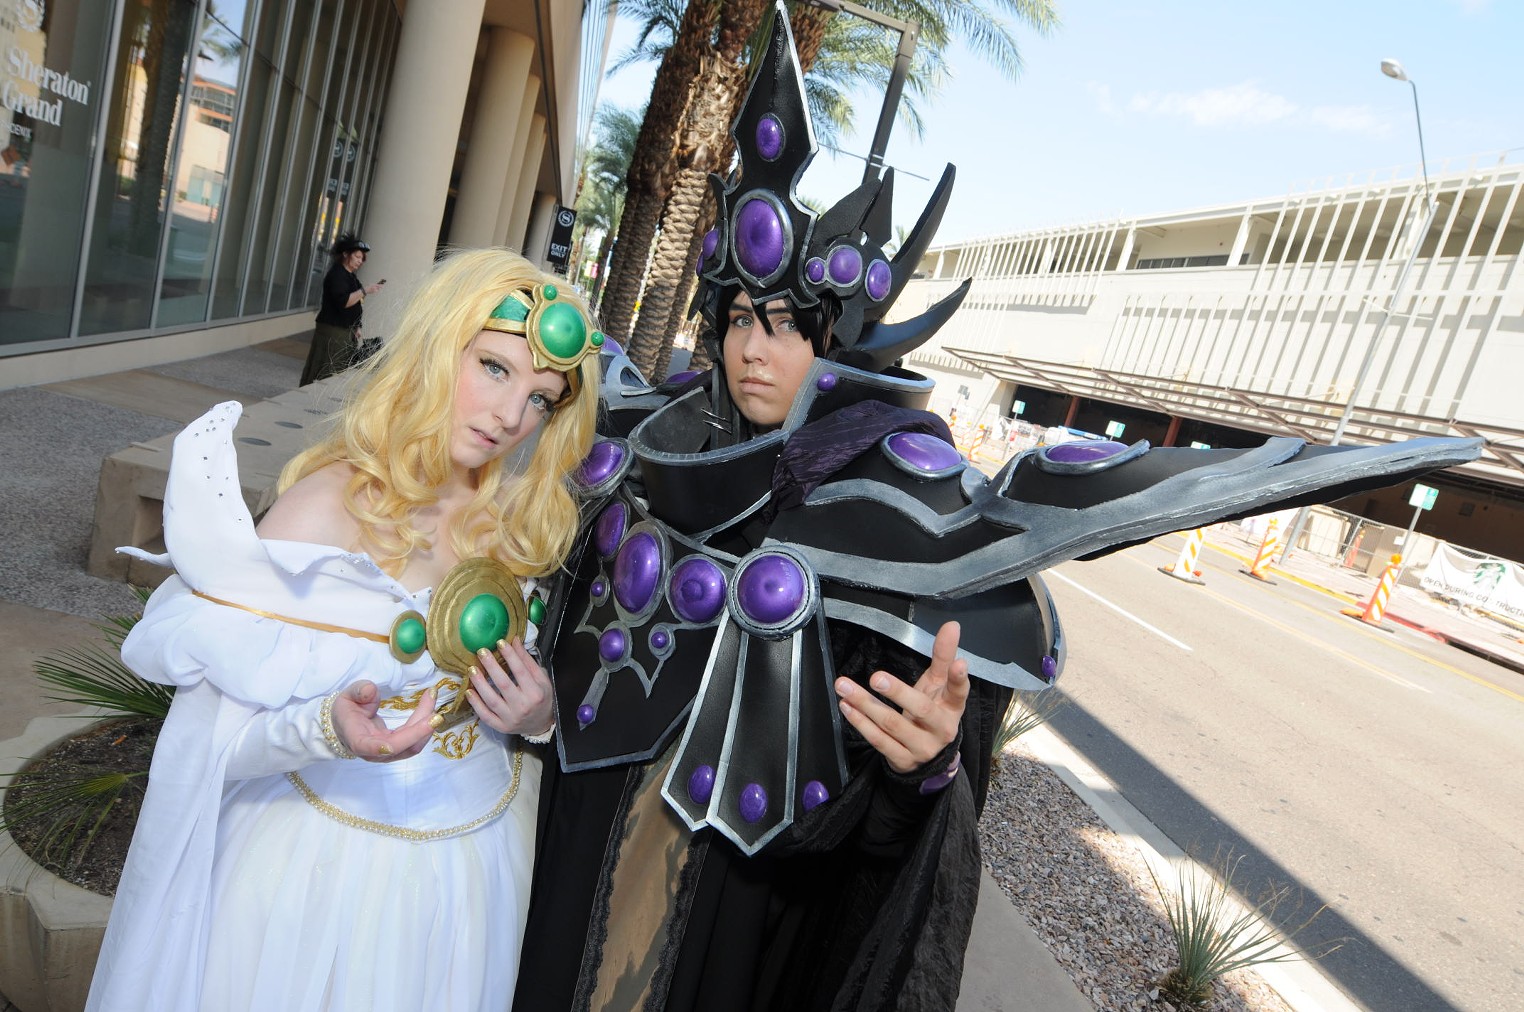 Catch a movie in Conroe attend an anime convention 9 June events to  attend  Community Impact